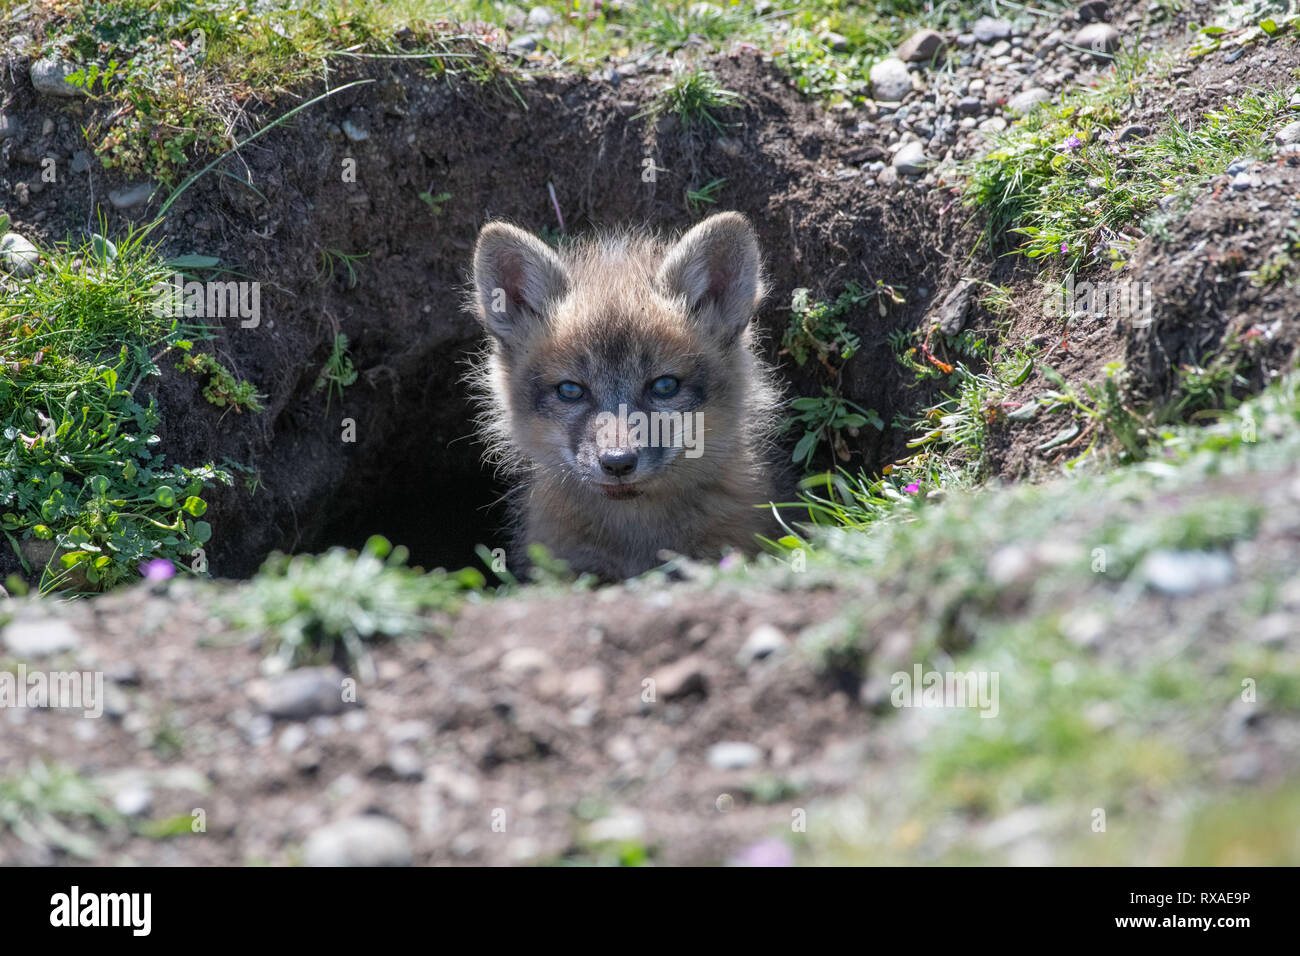 A cross fox pup peaking out of it's den which is in a field full of wild flowers. Fox Crosses are partially melanistic colour variant of the red fox, Vulpes vulpes. Stock Photo